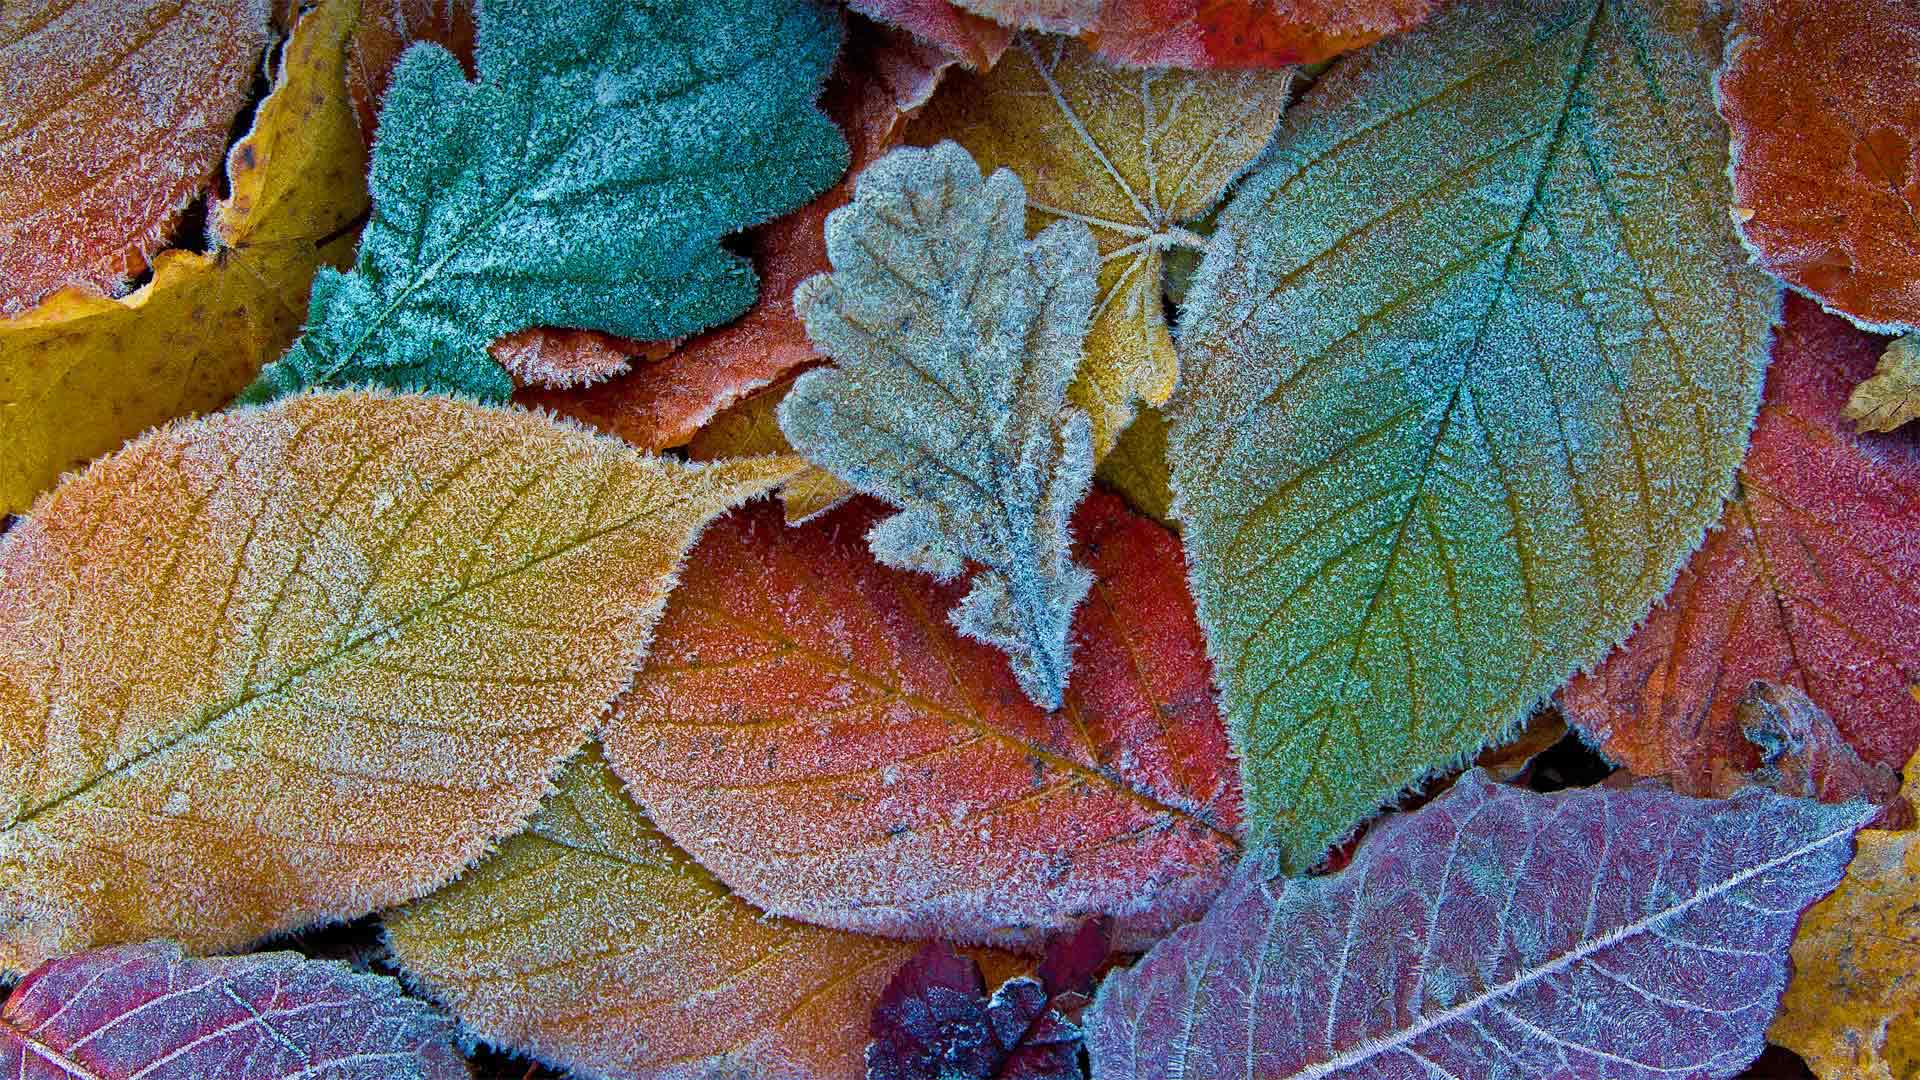 Autumn leaves coated with frost - sagarmanis/Getty Images)